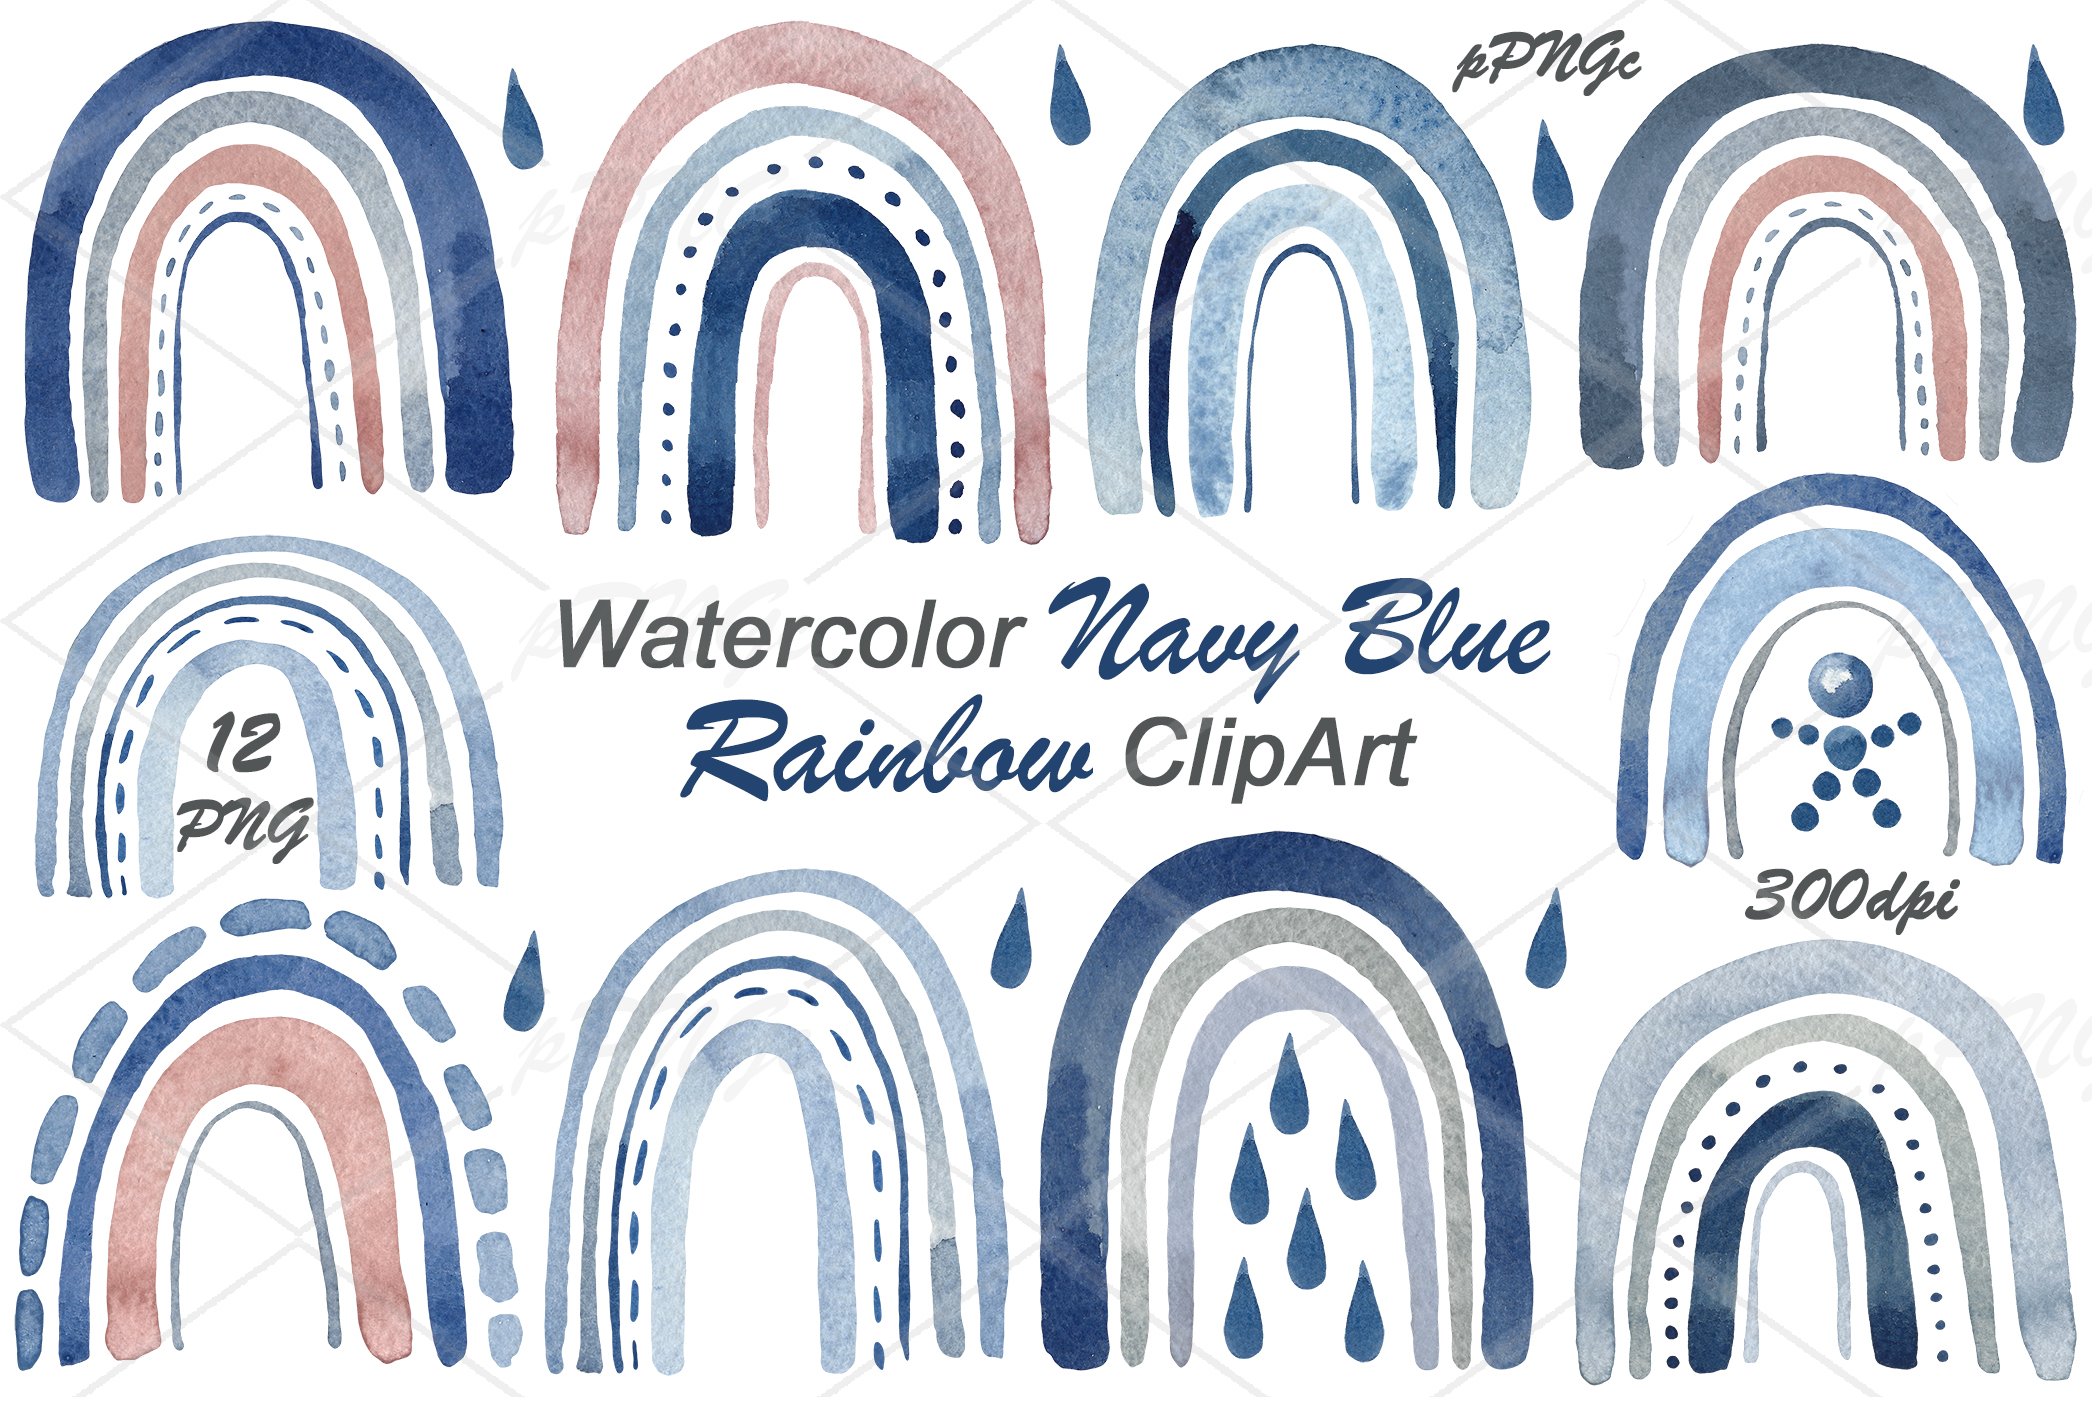 Watercolor Navy Blue Rainbows cover image.